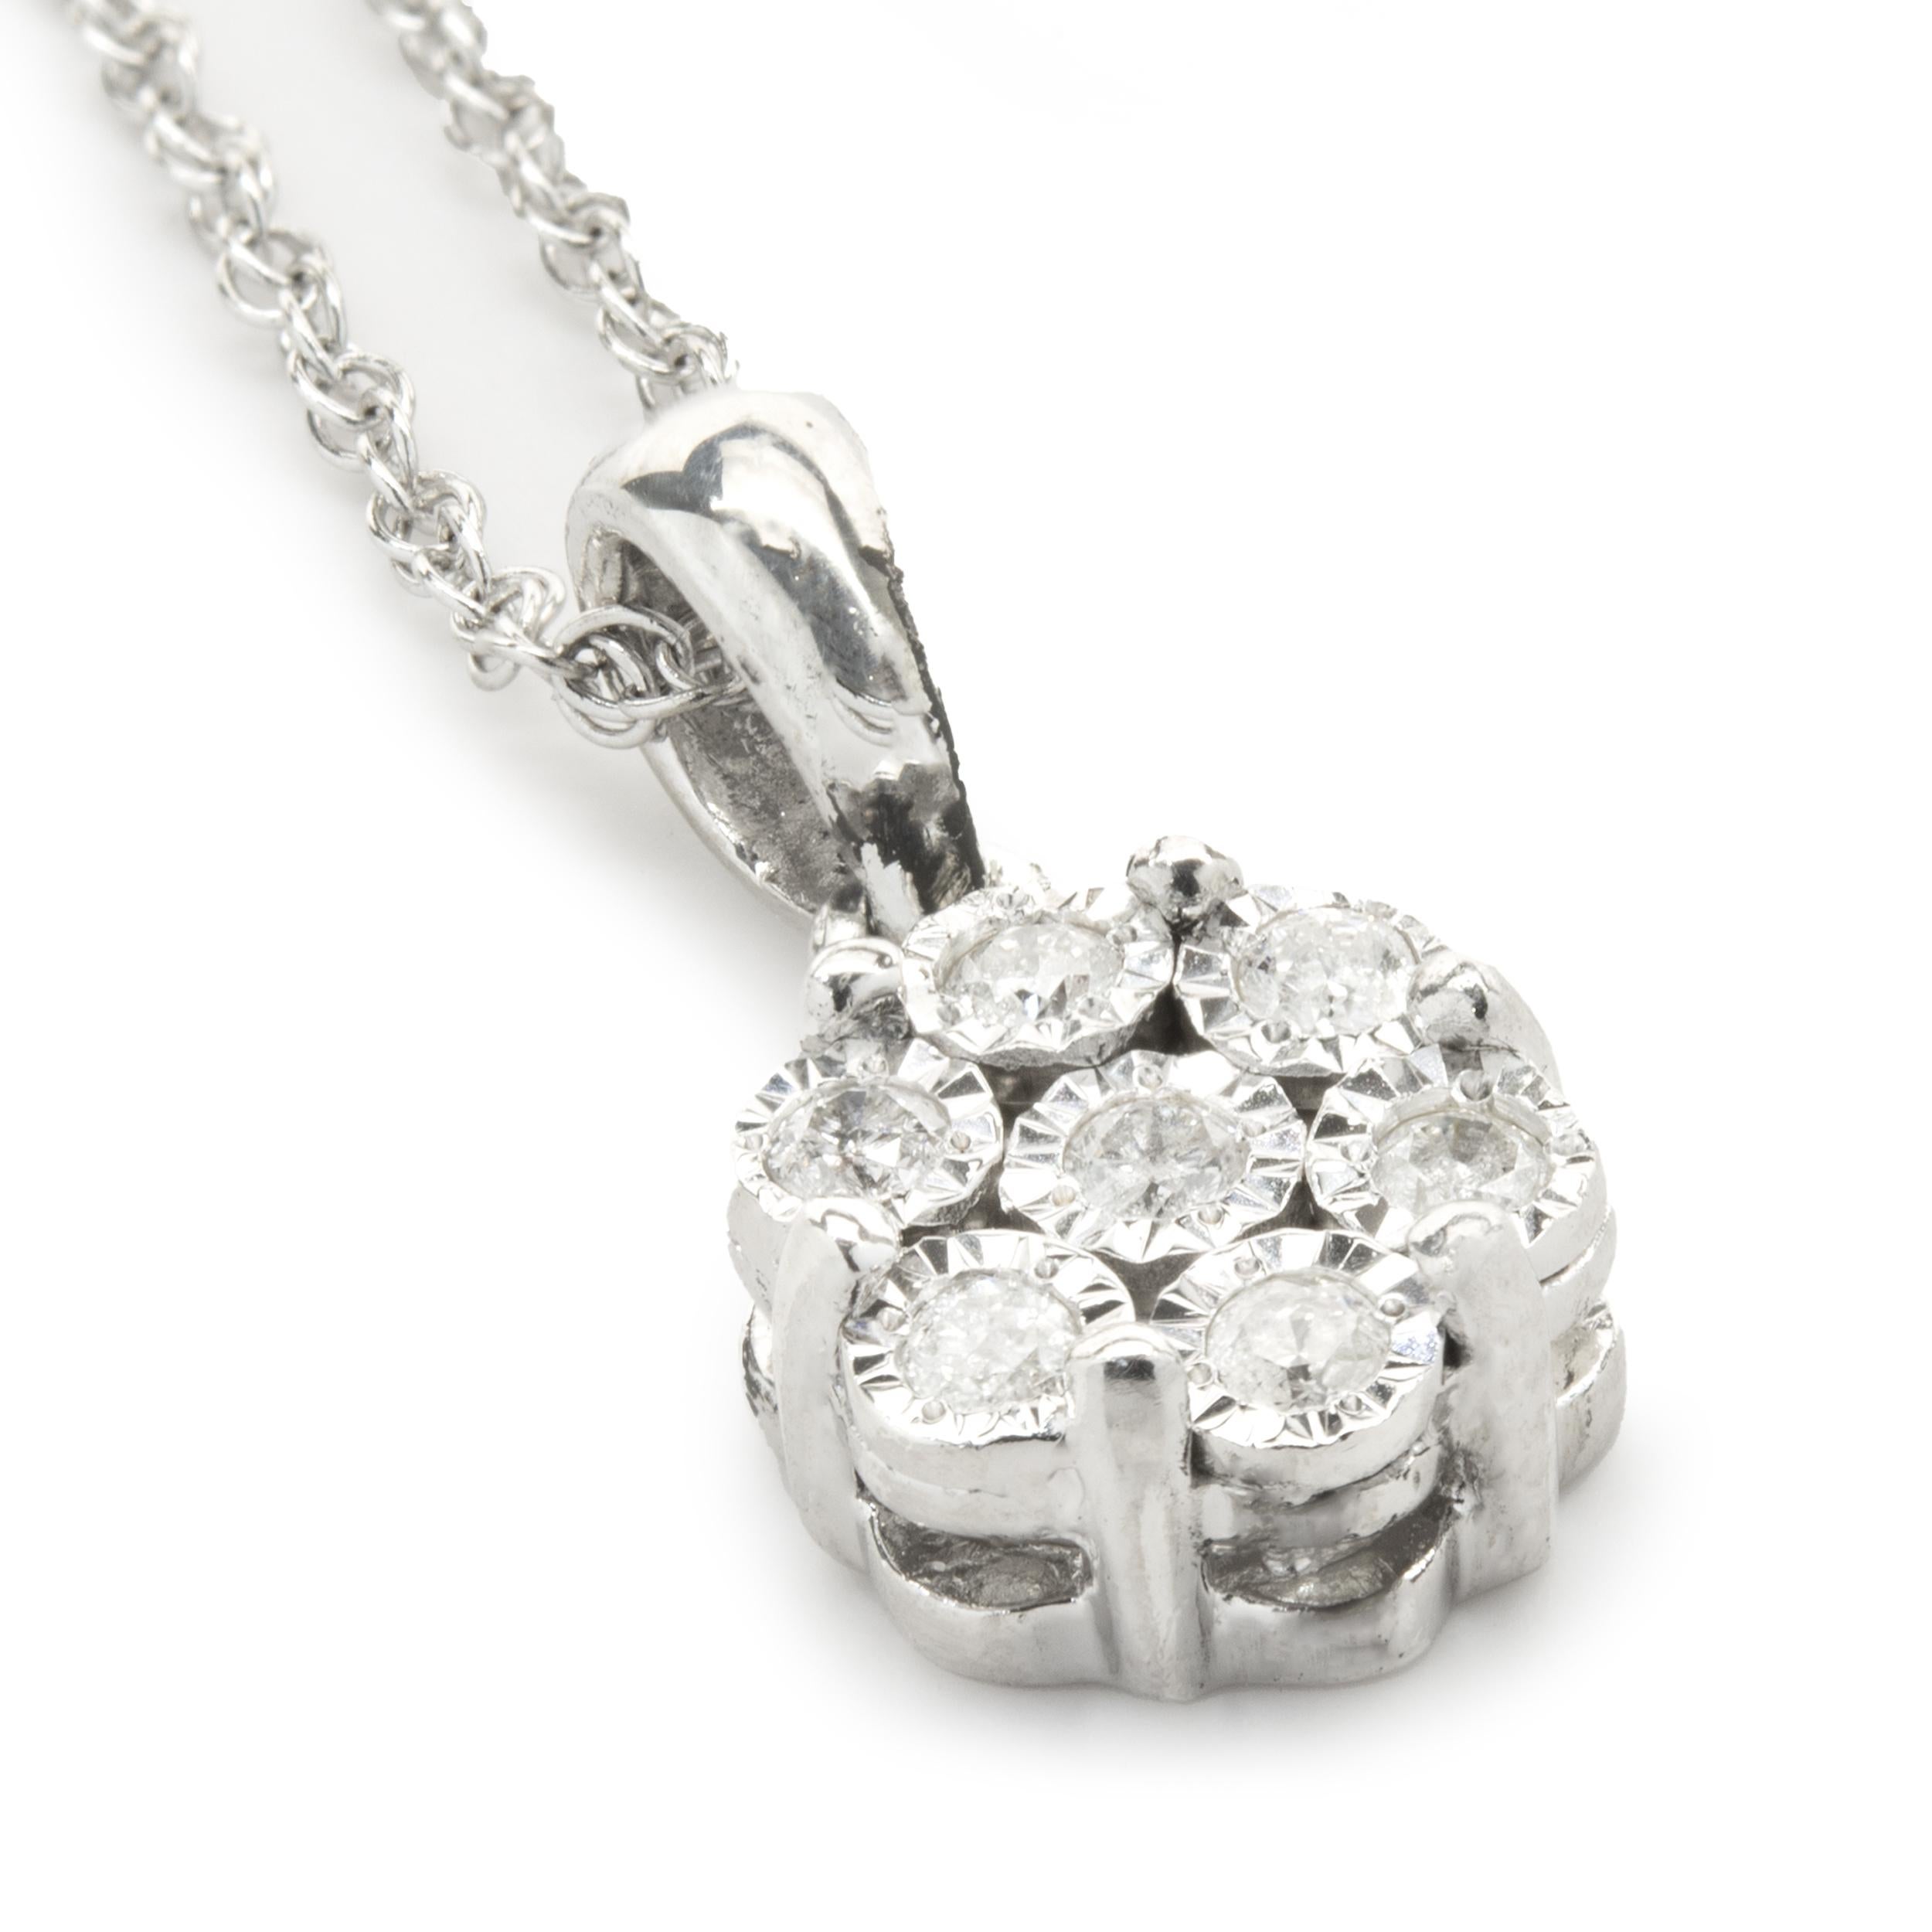 Designer: Effy
Material: sterling silver
Diamond: 6 round cut = .10cttw
Color: G
Clarity: I1
Weight: 1.88 grams
Dimensions: necklace measures 18-inches long